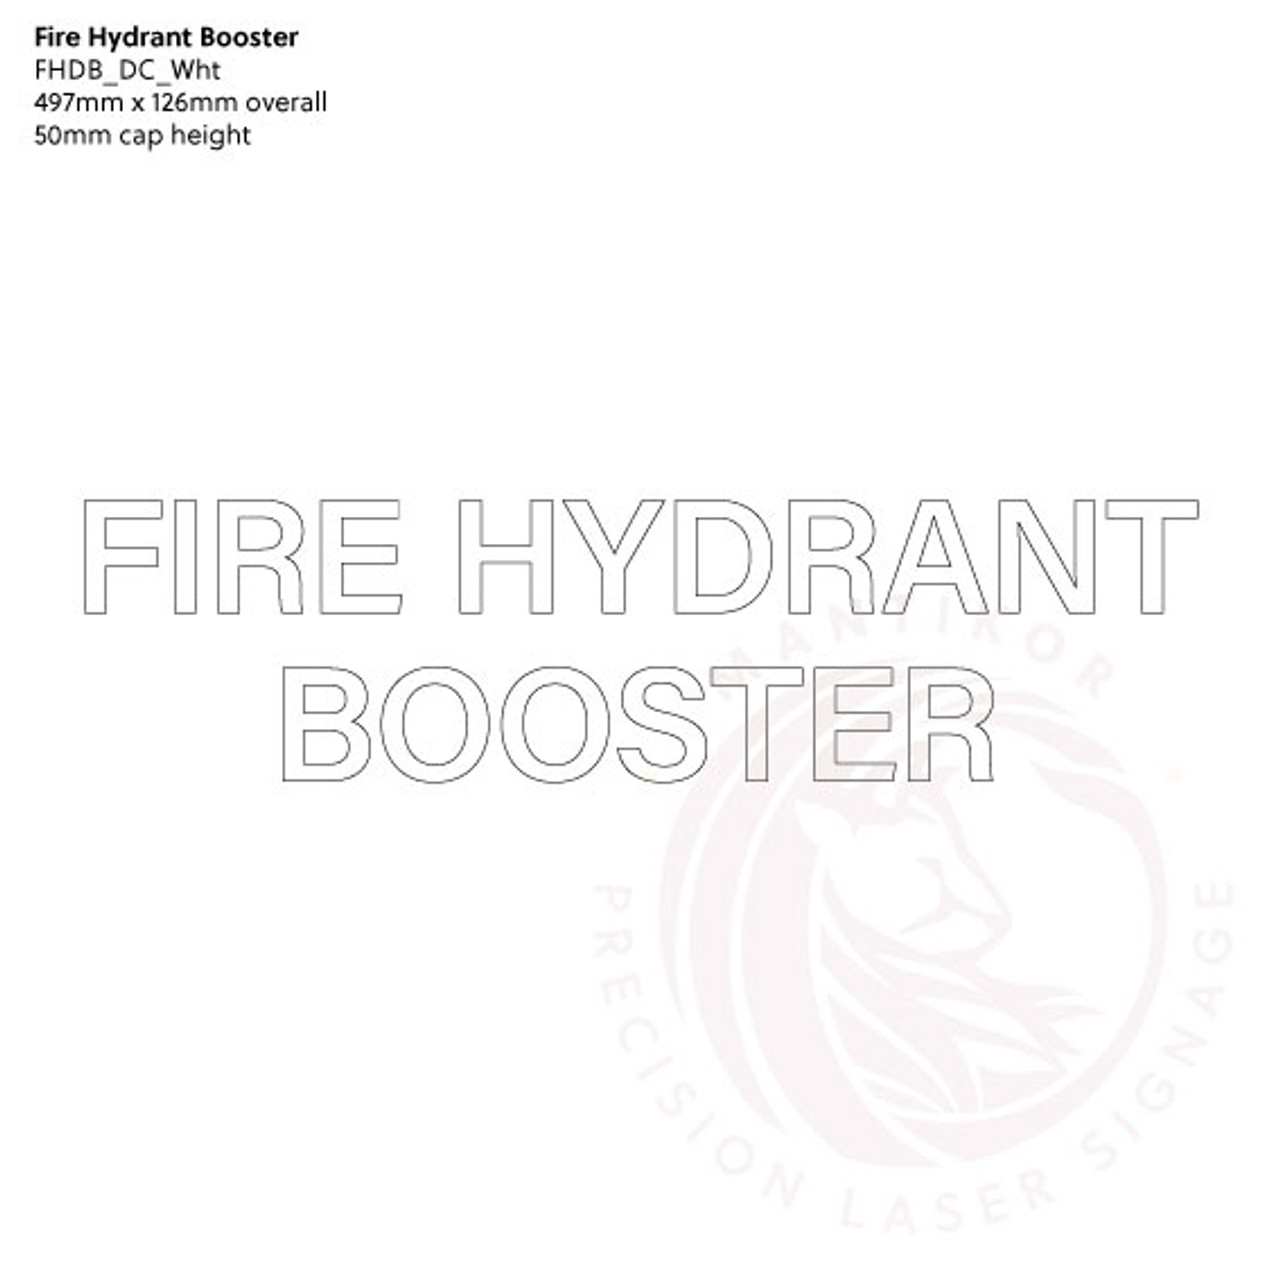 Fire Hydrant Booster Decal in Gloss White Vinyl - Standard statutory sign, compliant with the Building Code of Australia requirements.